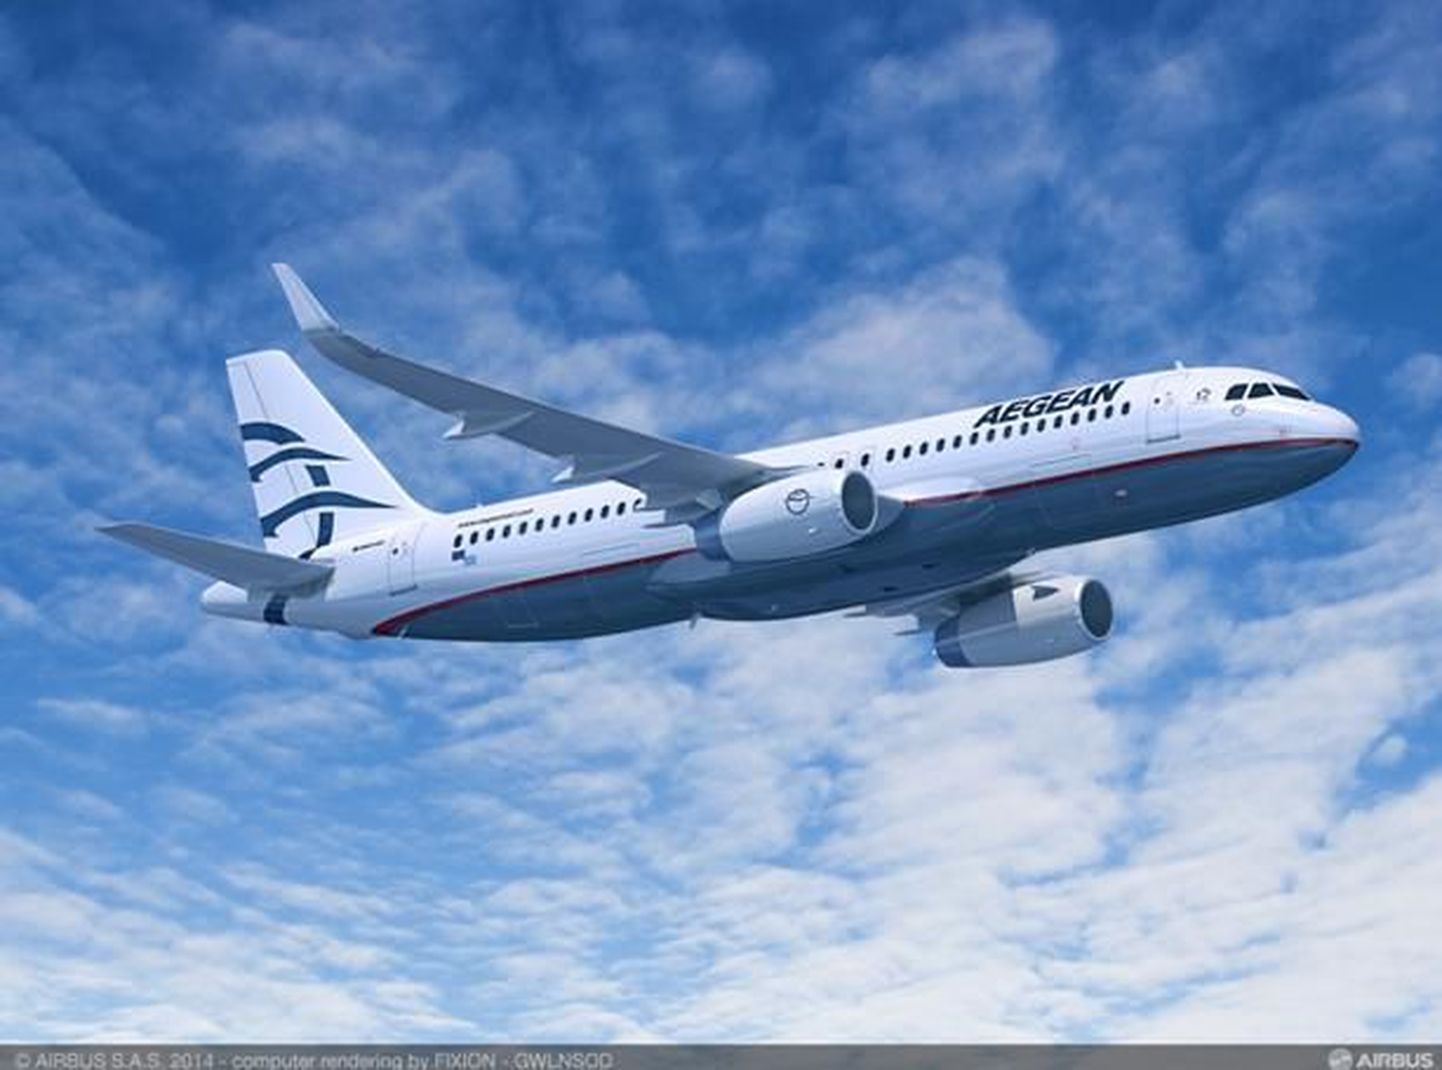 Aegean Airlines A320ceos.